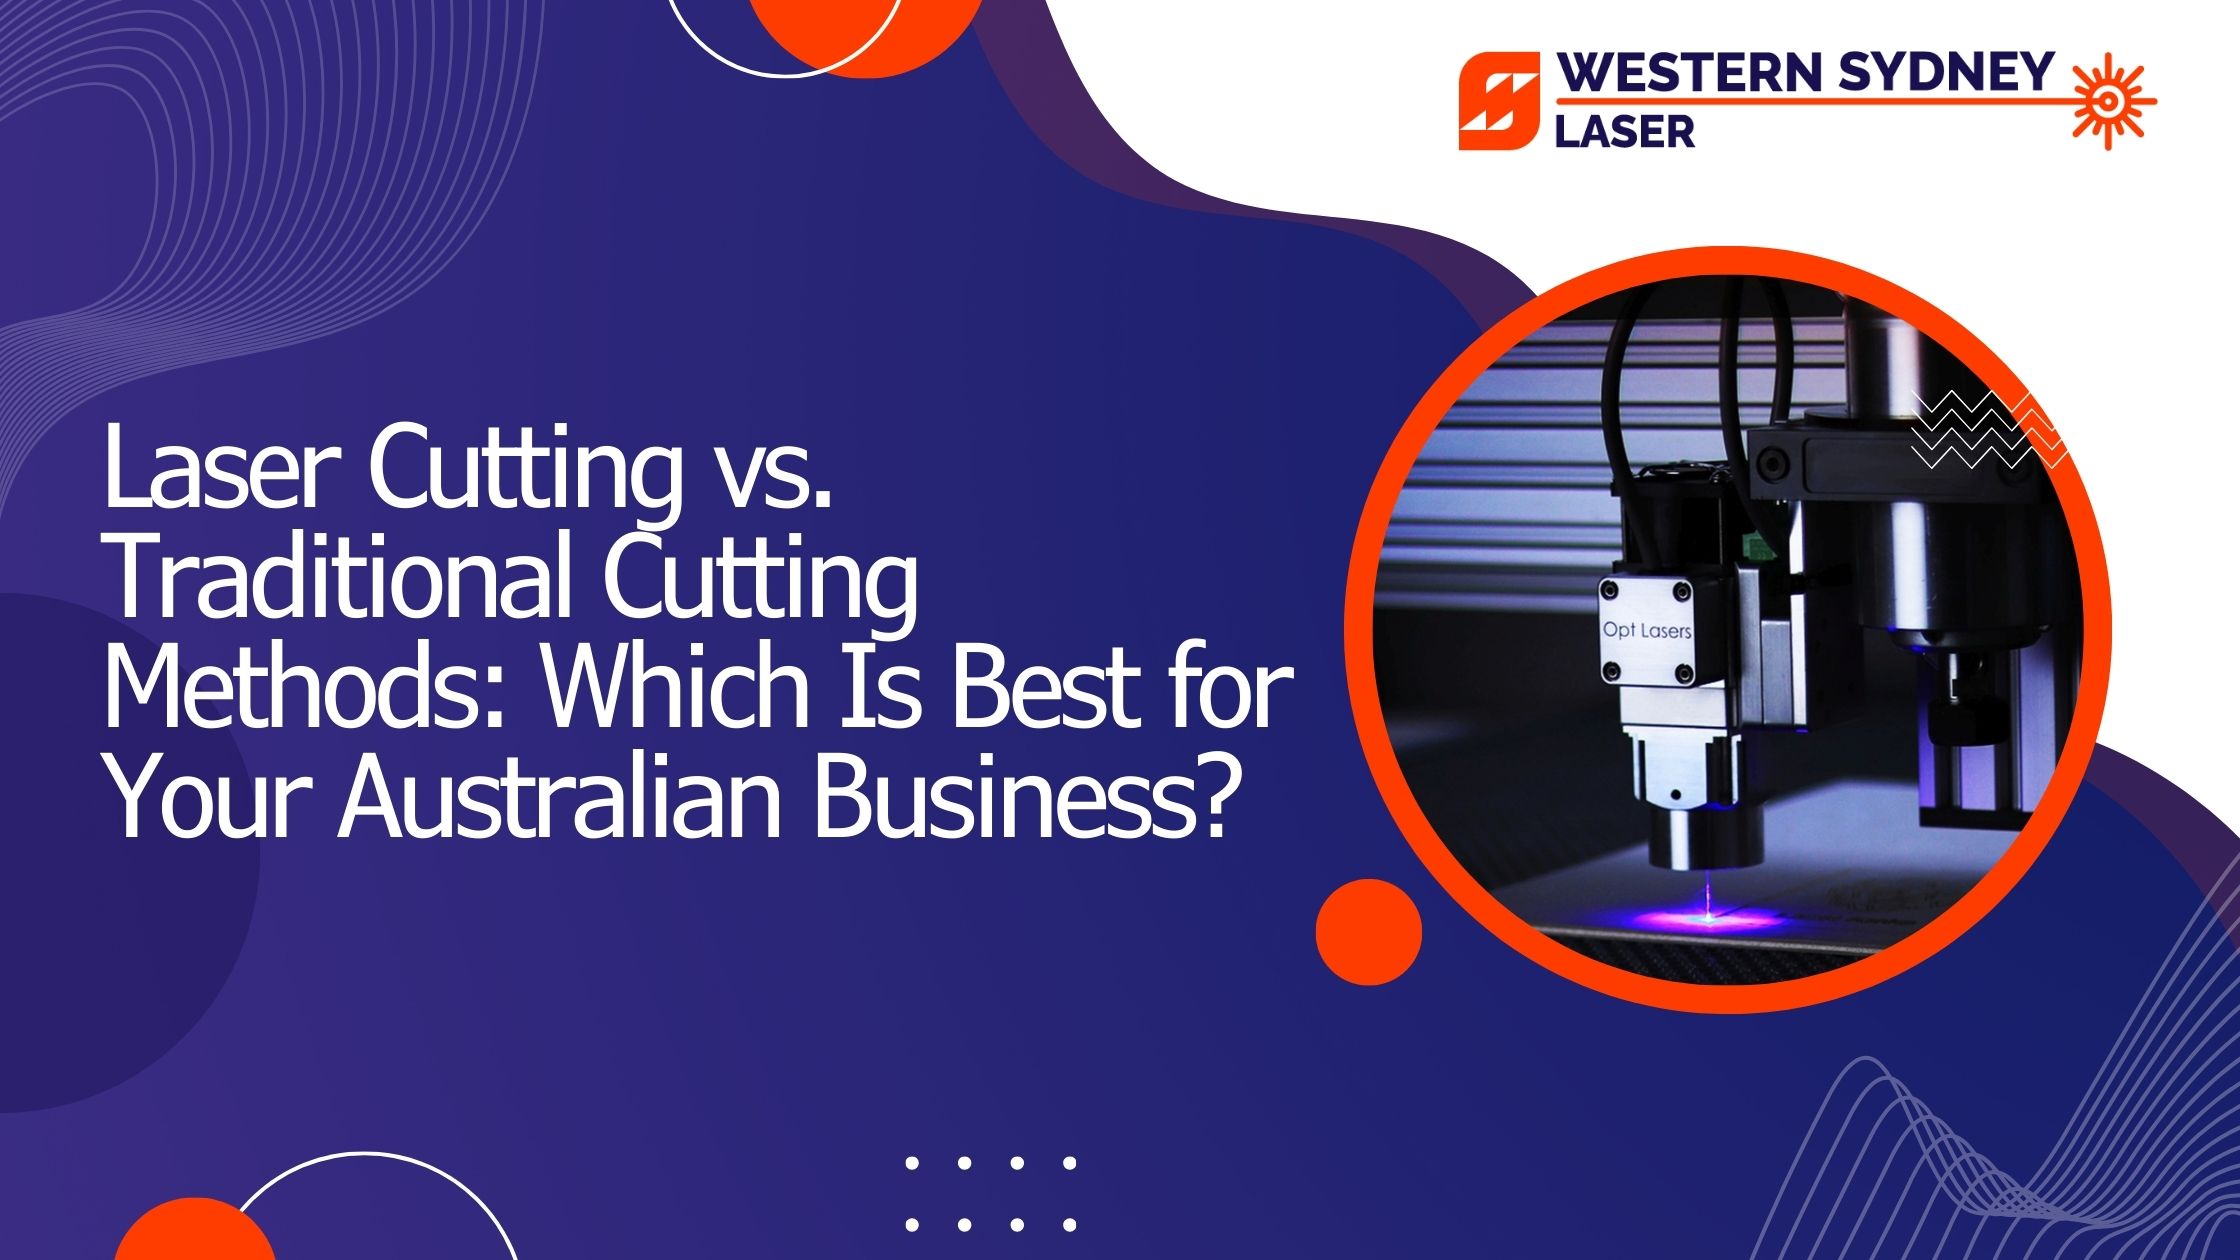 Laser Cutting vs. Traditional Cutting Methods: Which Is Best for Your Australian Business?